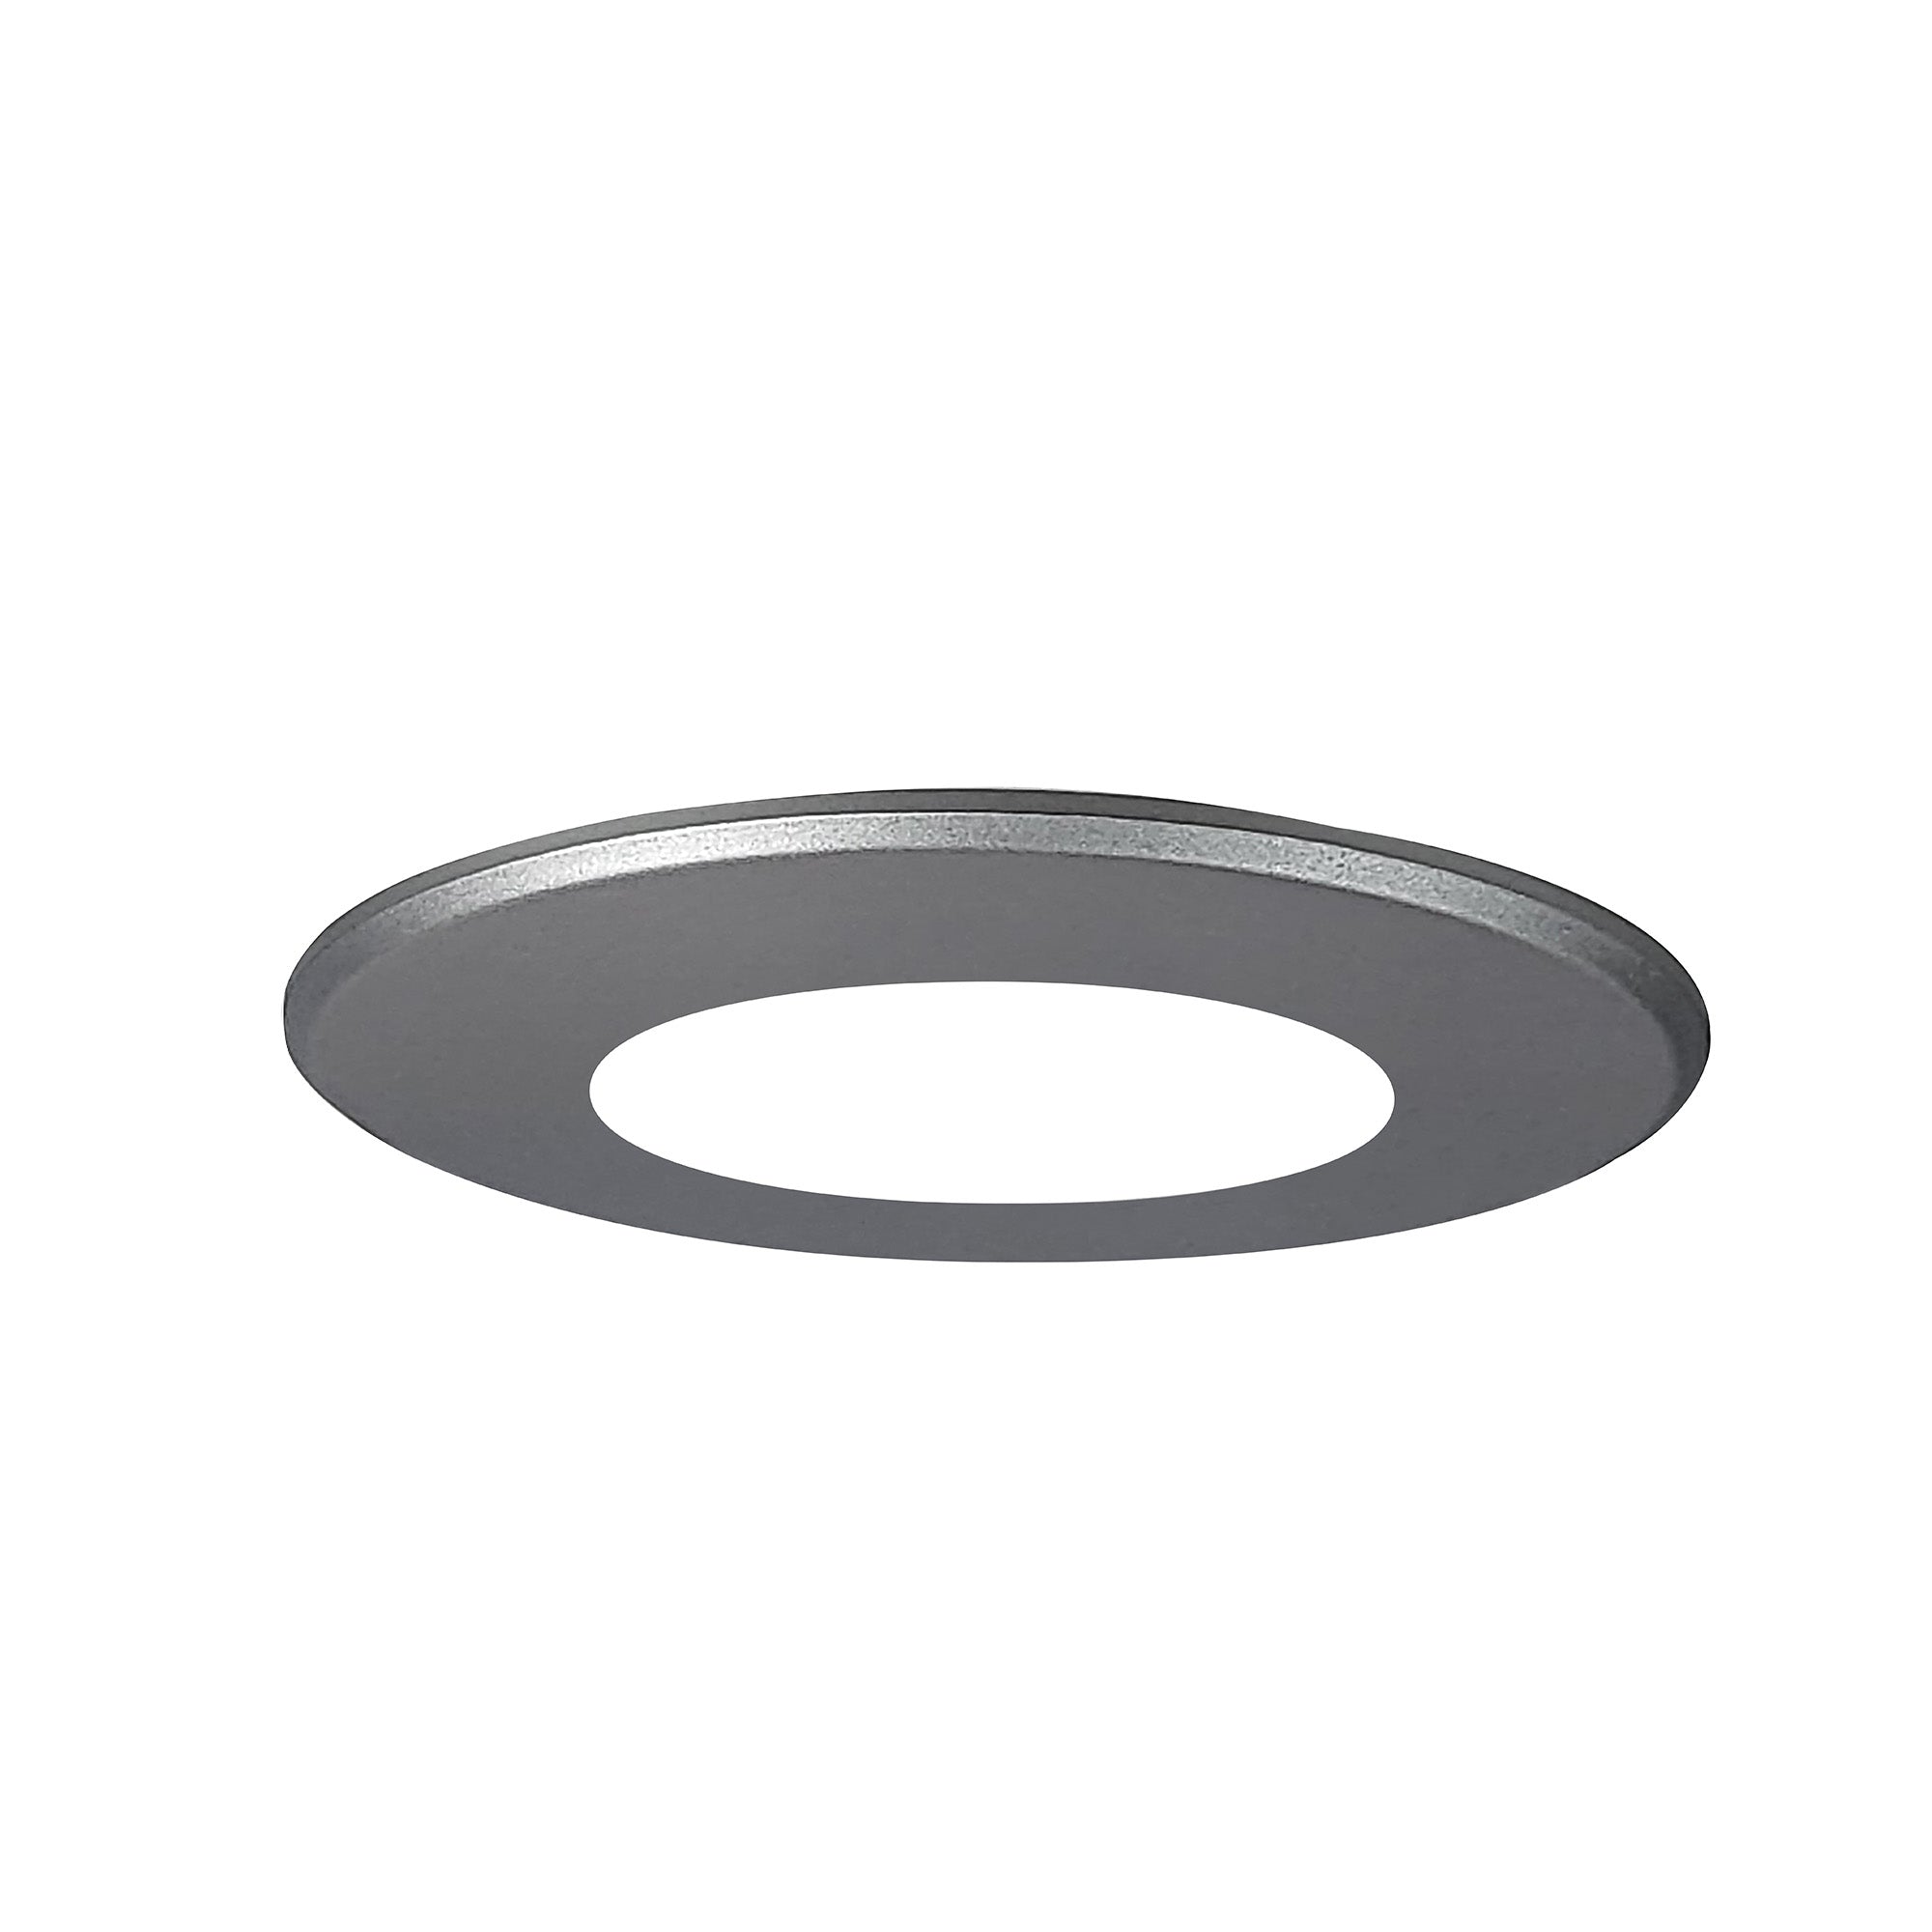 Nora Lighting NSLIM-4RDTS - Surface - Round Face Plate for NSLIM, Silver Finish